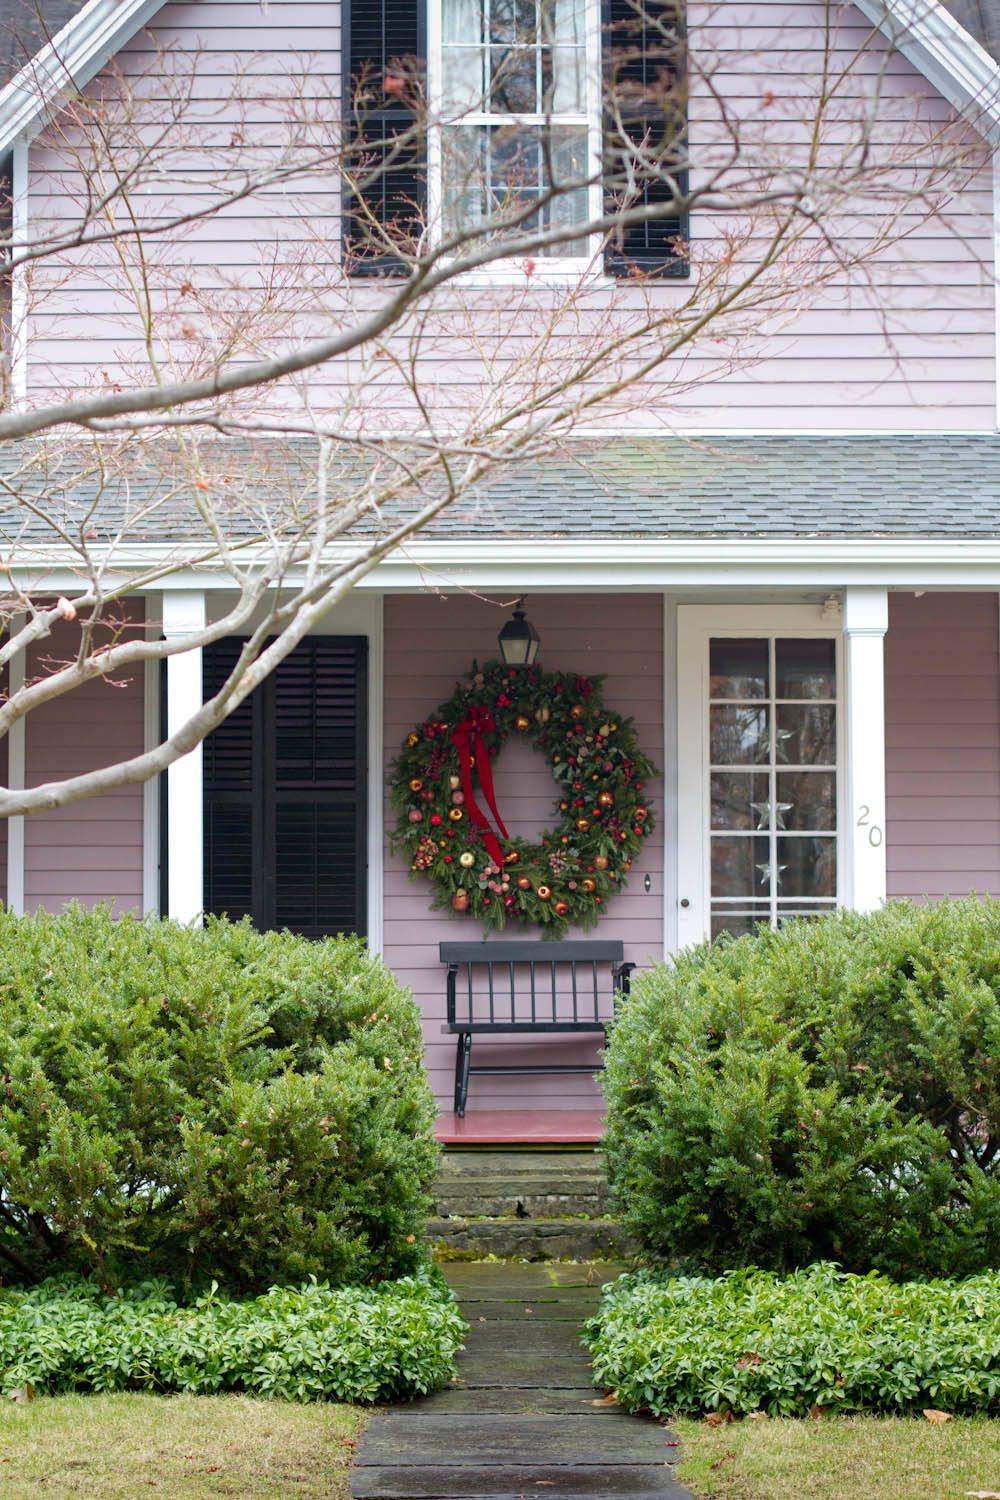 Large wreath brings festive cheer to the front porch of this charming New York home